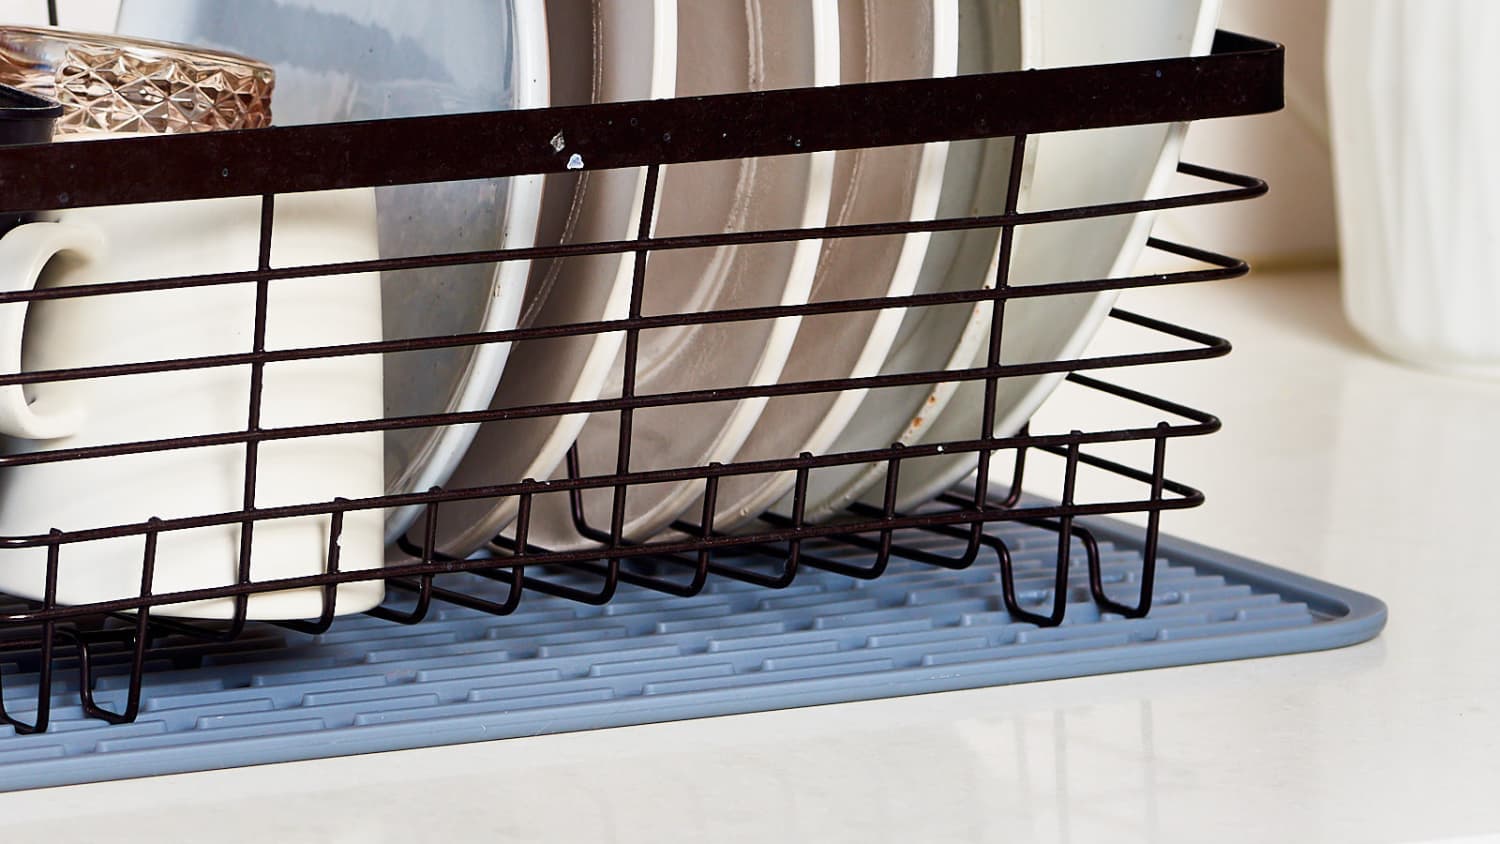 This $30 Space-Saving Drying Rack Changed My Cleaning Habits